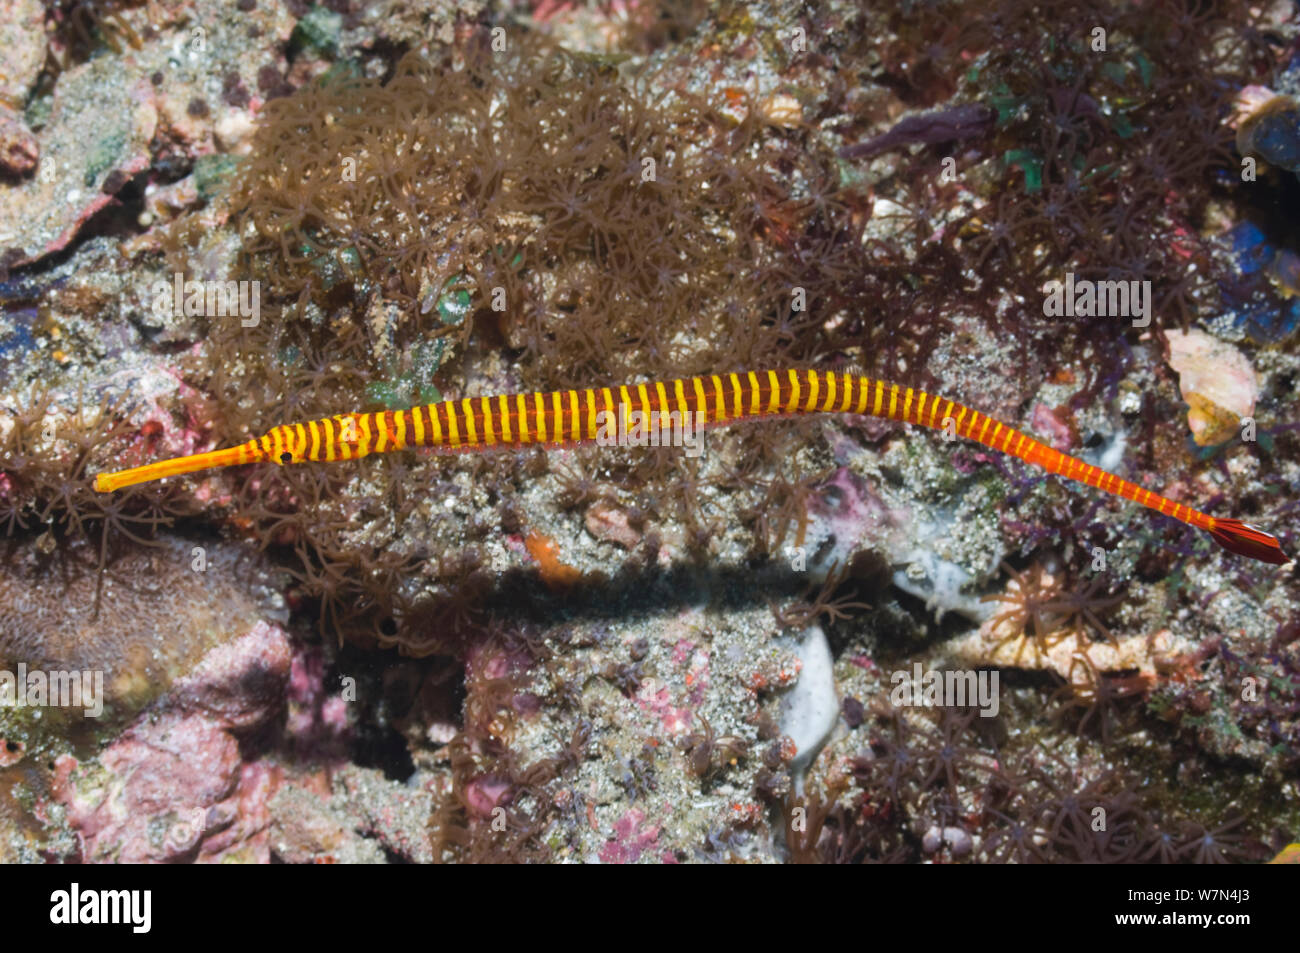 Yellowbanded pipefish (Doryhamphus pessuliferus) with eggs attached to his stomach, Rinca, Komodo National Park, Indonesia Stock Photo